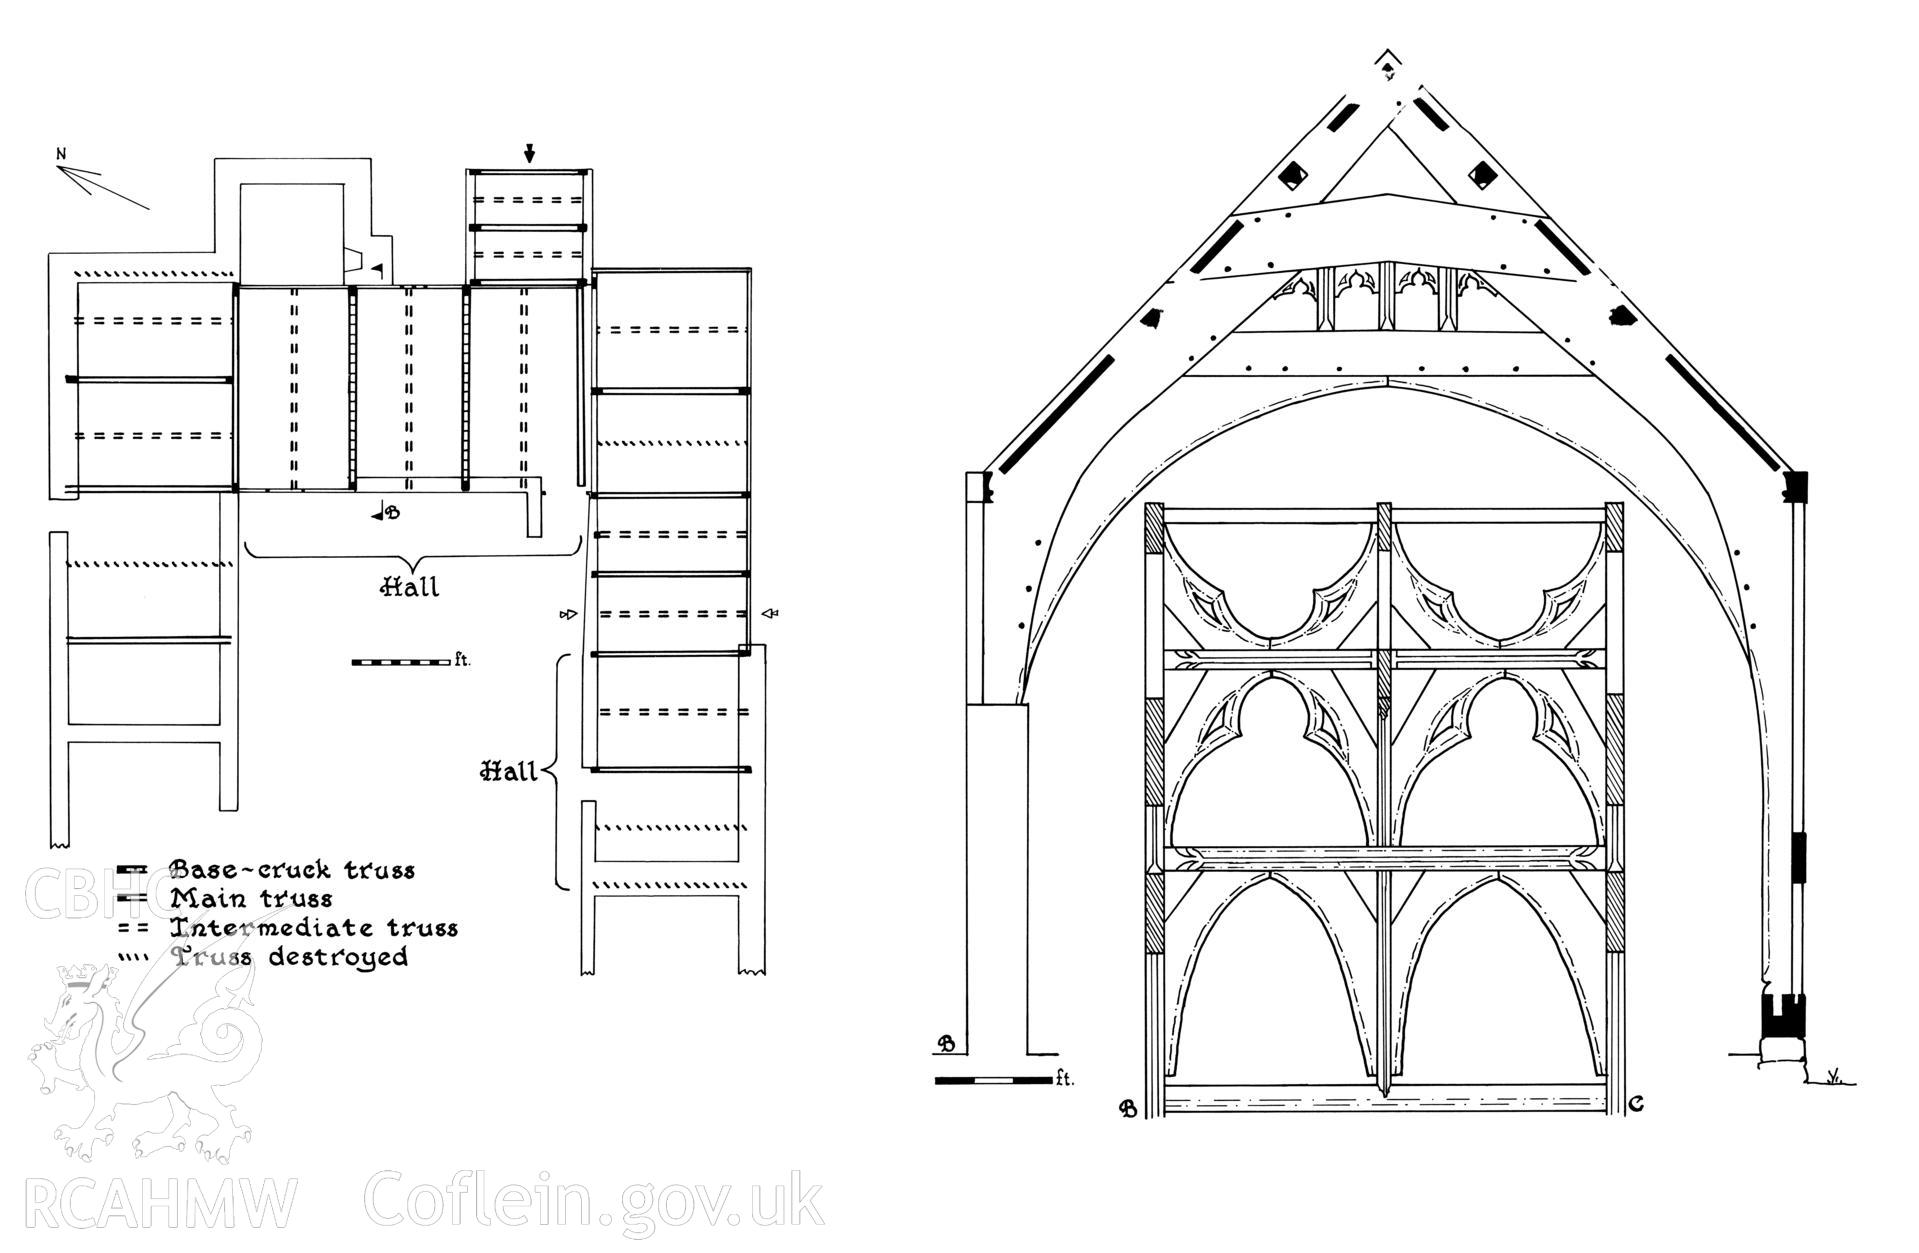 RCAHMW drawing showing plan and truss section of Bryndraenog, Bugeildy.